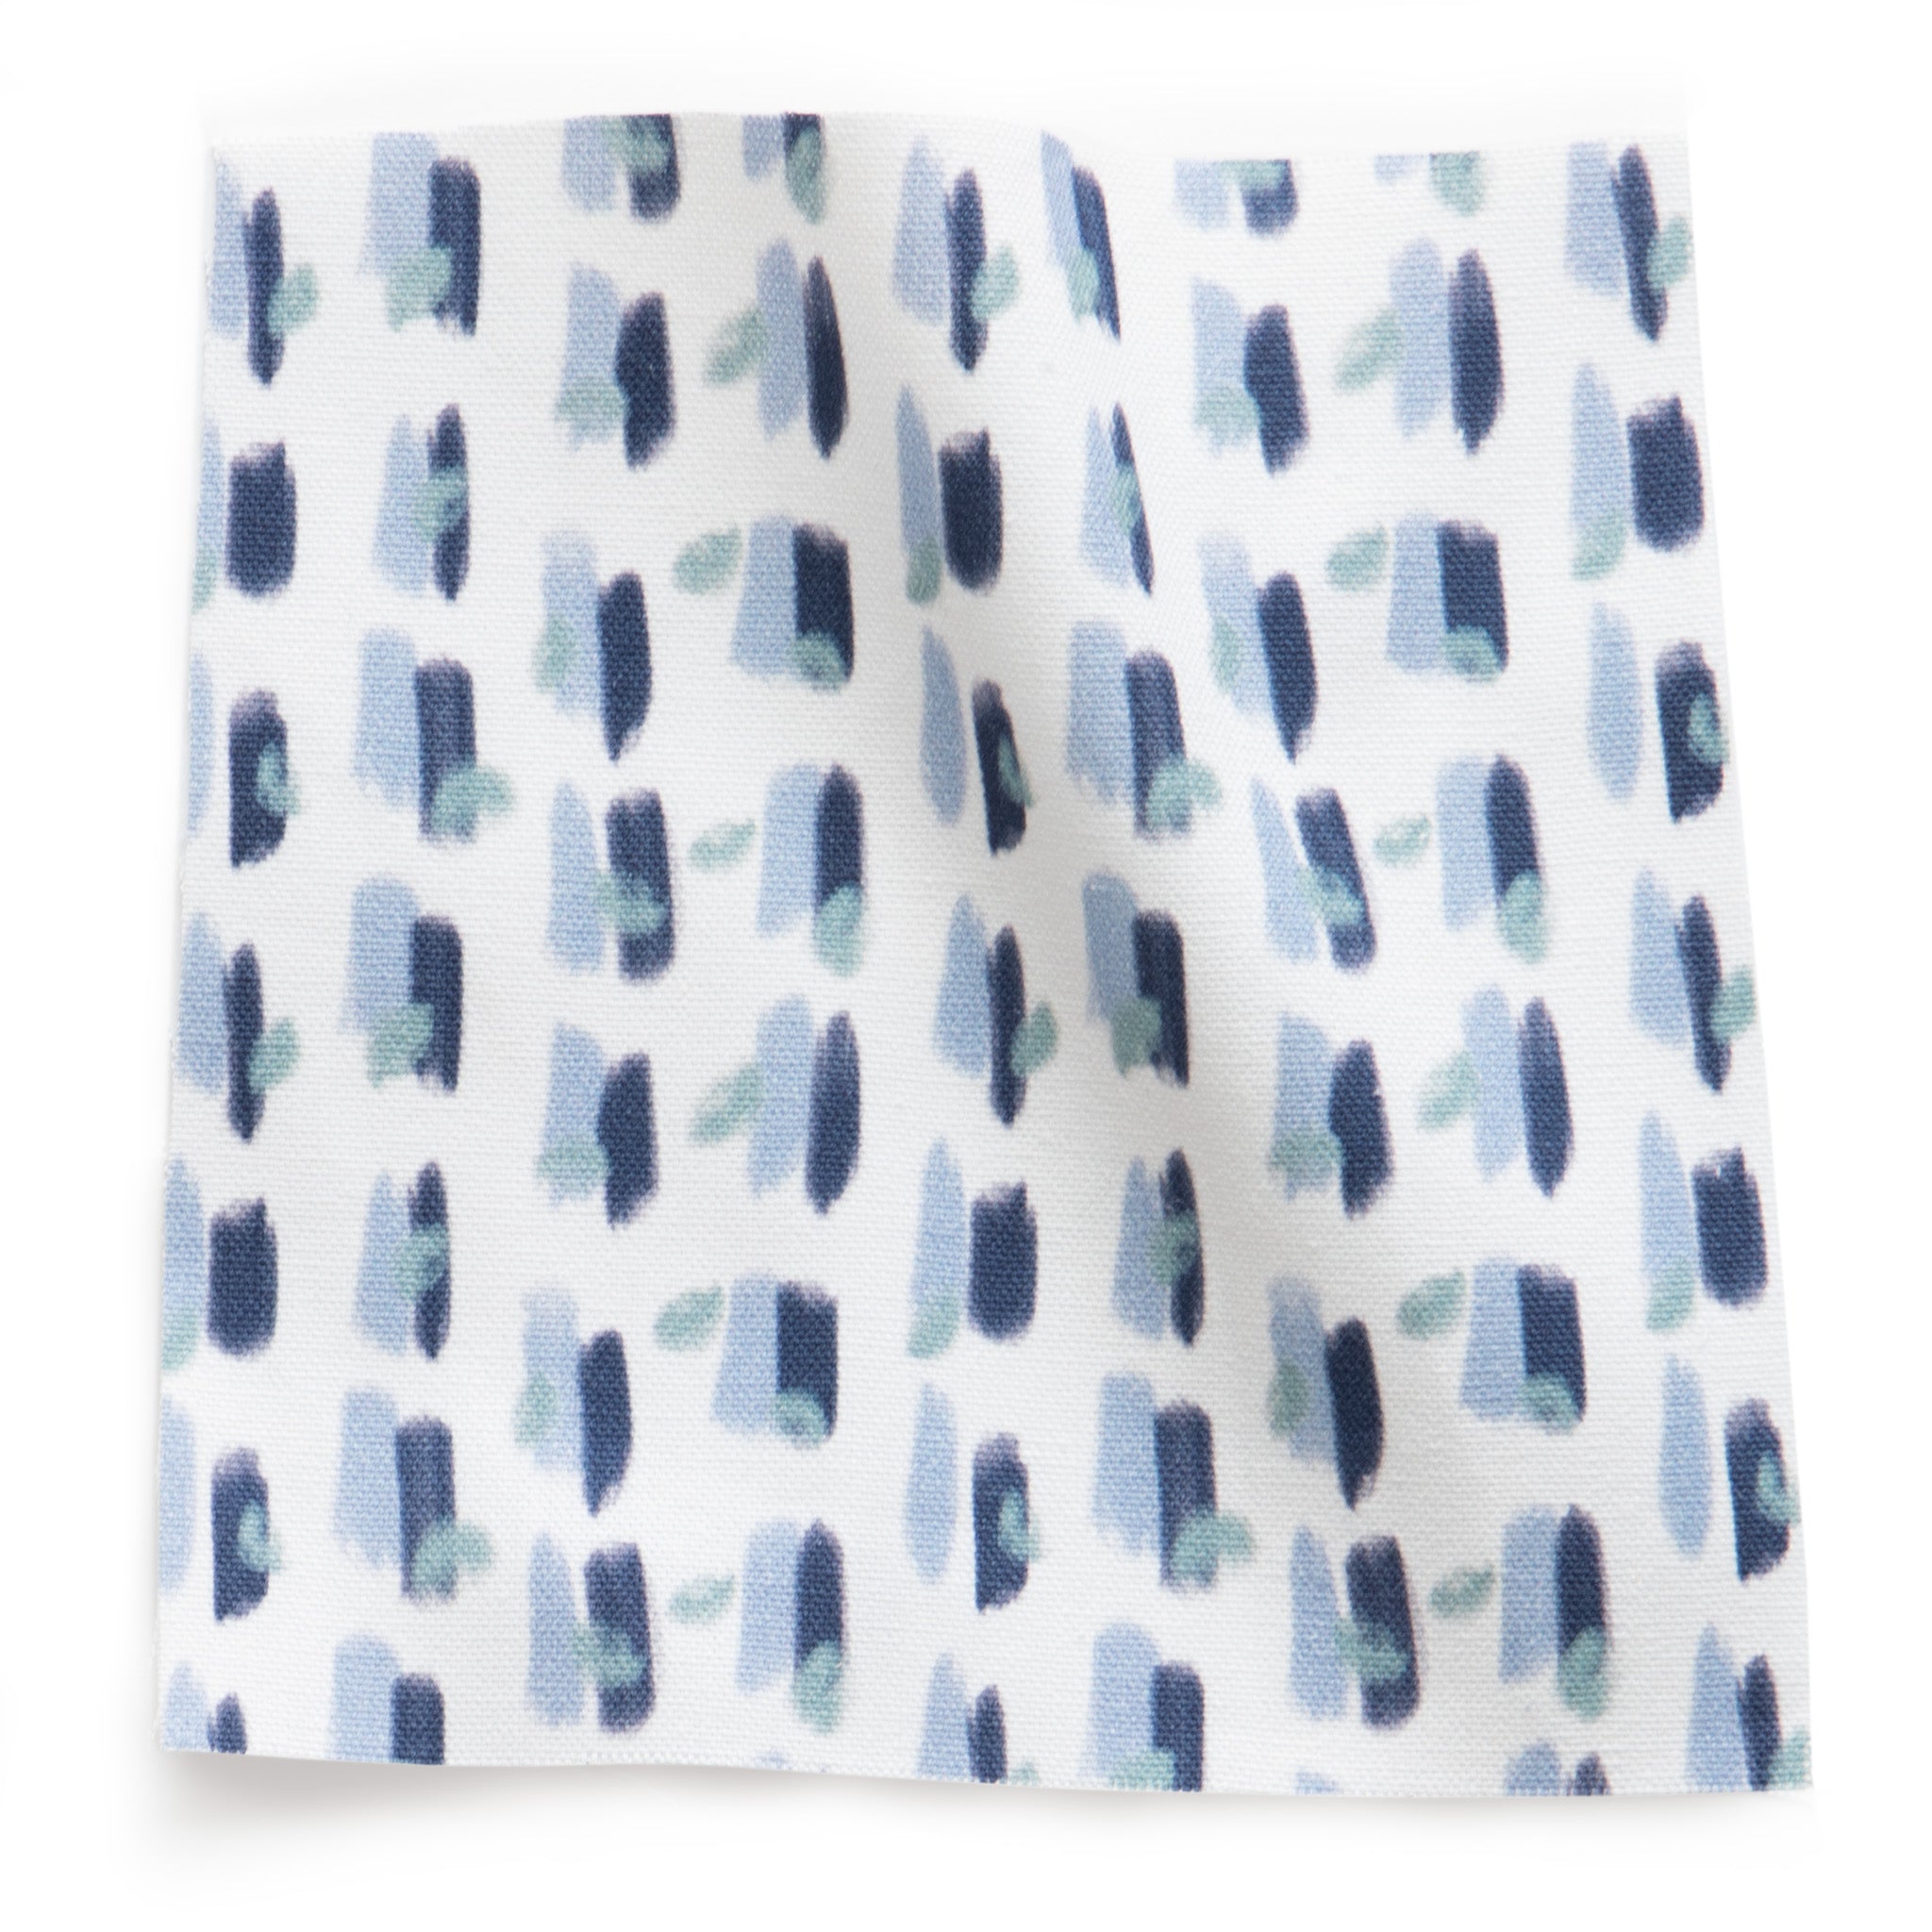 Sky and Navy Blue Poppy Printed Cotton Swatch